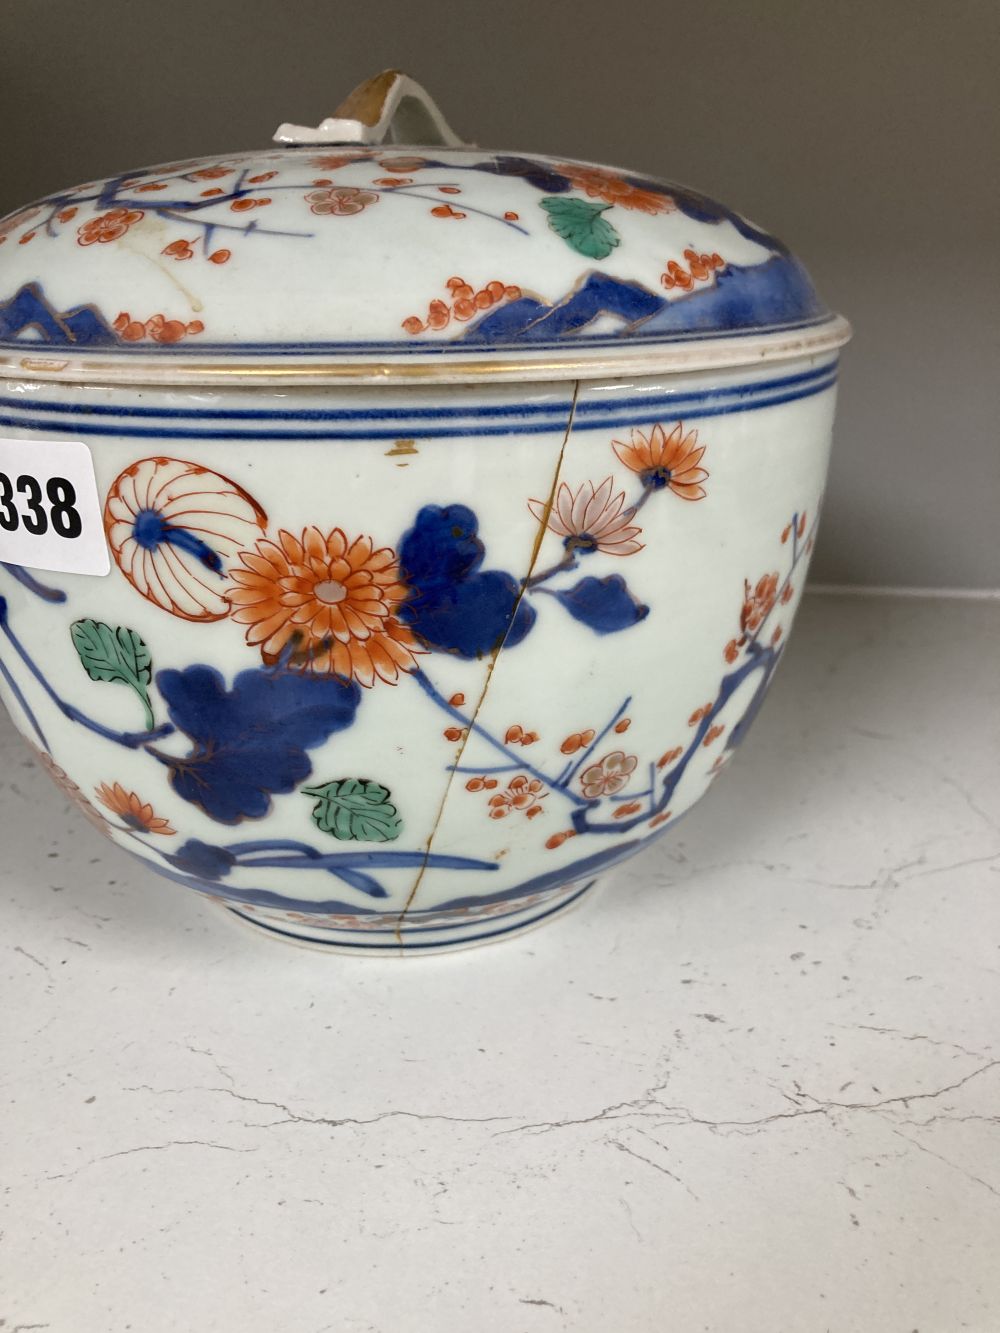 Two 19th century Chinese famille rose brushpots, and other Chinese and Japanese porcelain items, 18th-20th century